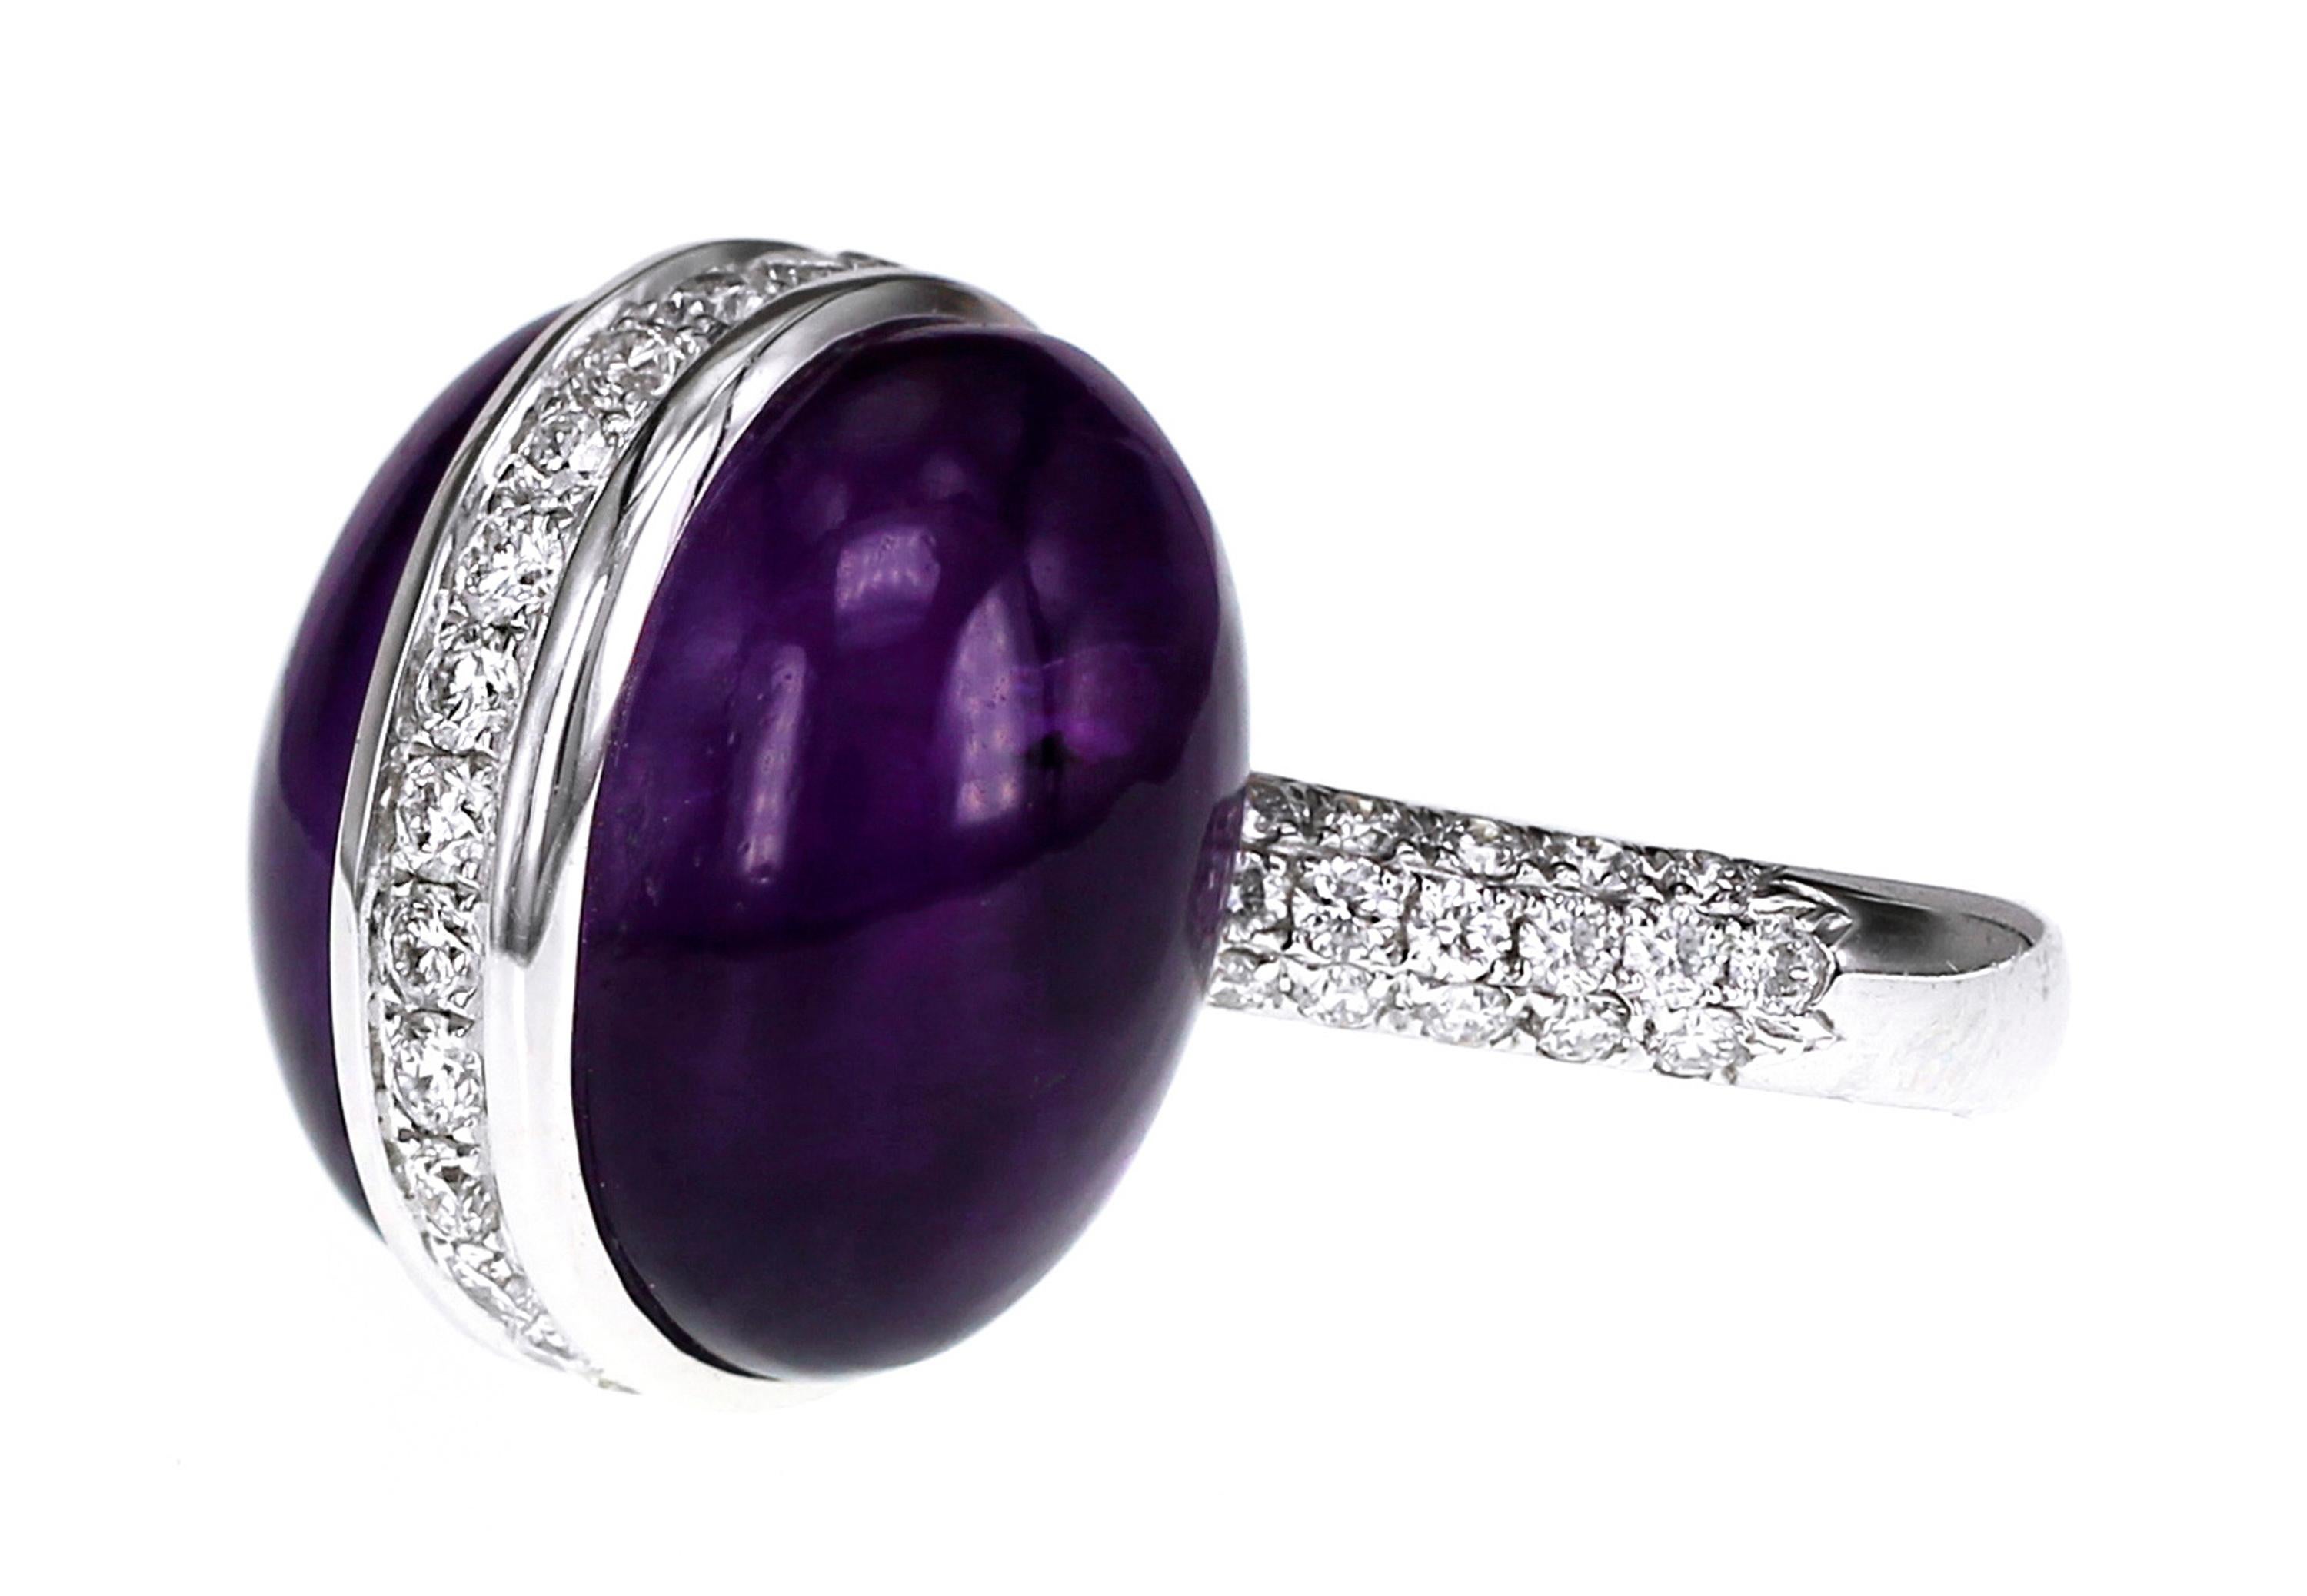 21.45 carats of Amethyst and 1.00 carats of white diamond are studded in this ring.
The ring is inspired by a futuristic space ship and would definitely be a eye catching ring in all the red carpet events.
Details of the ring:
Color: F
Clarity: VS